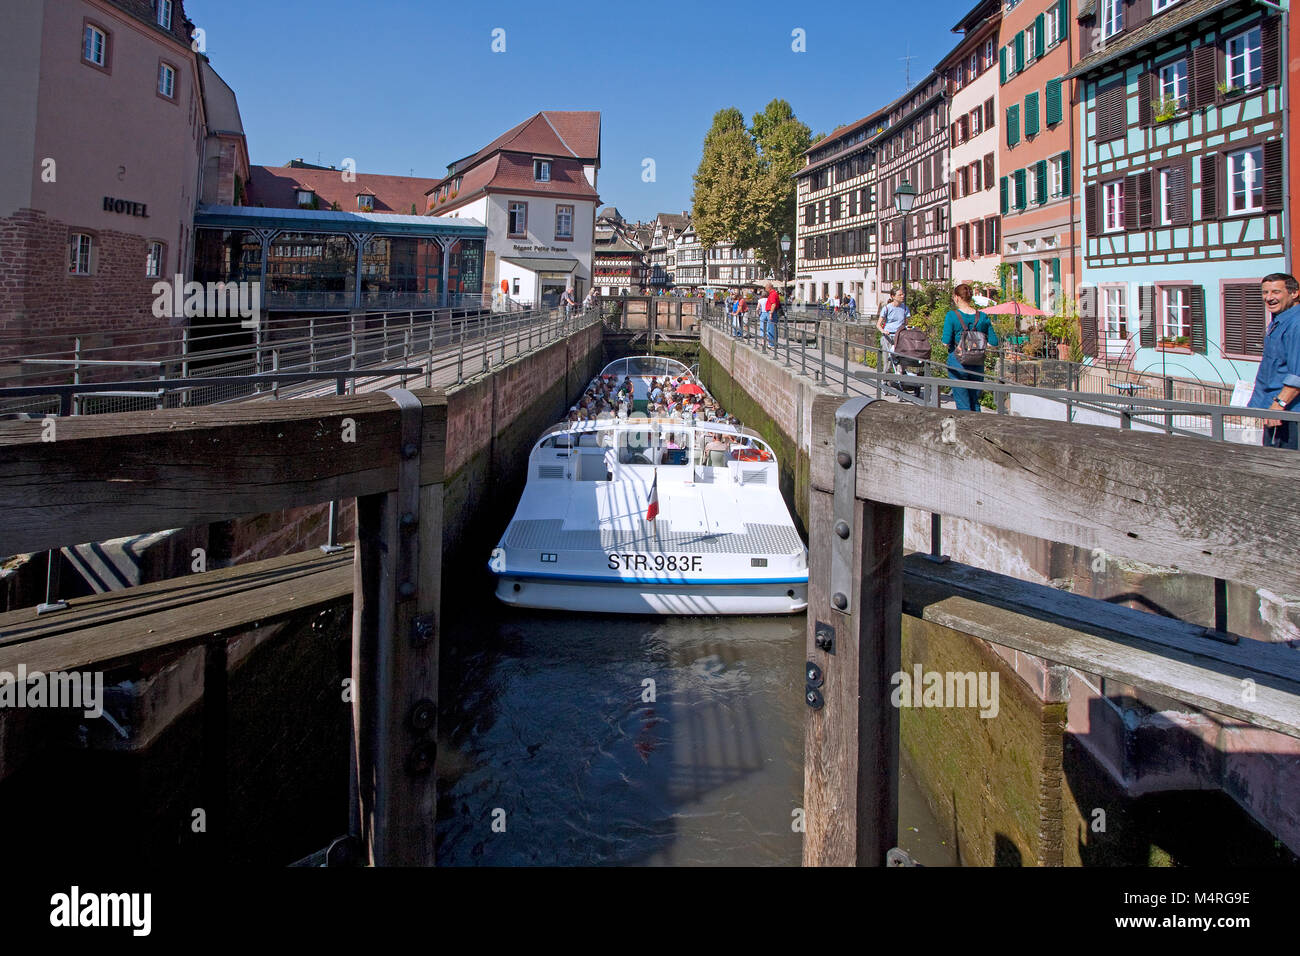 Excursion boat at floodgate of Ill river, half-timber houses, La Petite France (Little France), Strasbourg, Alsace, Bas-Rhin, France, Europe Stock Photo